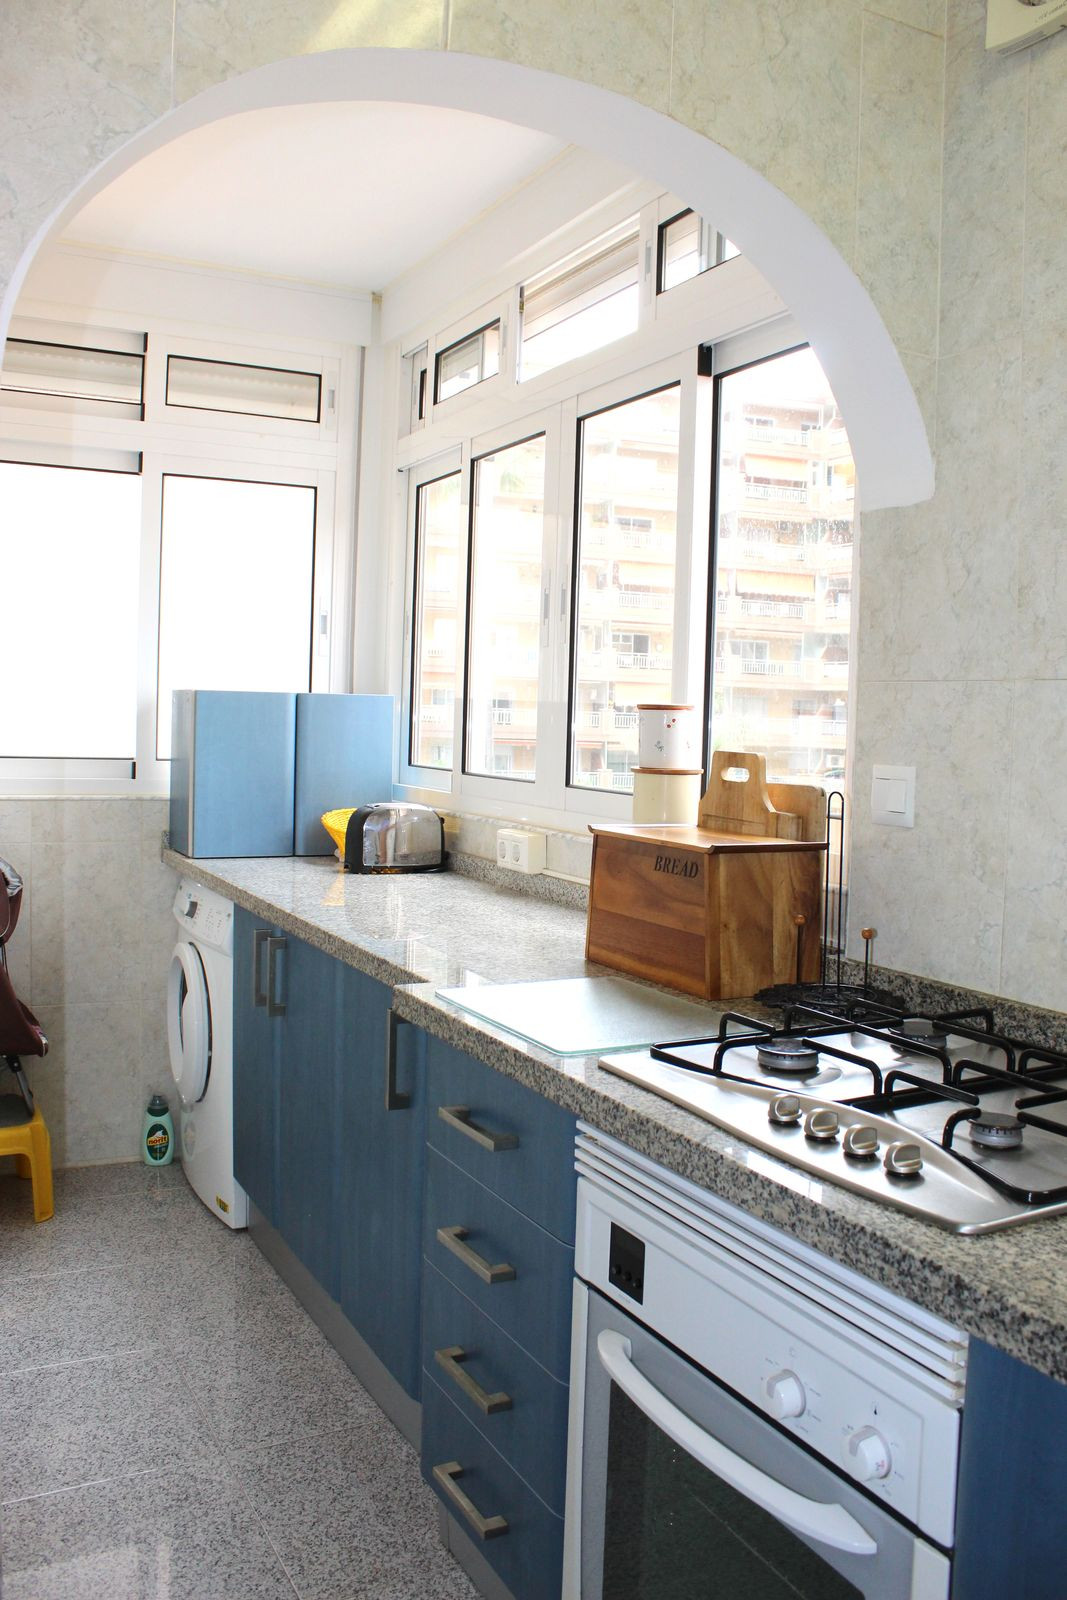 2 bedroom Apartment For Sale in Los Boliches, Málaga - thumb 10